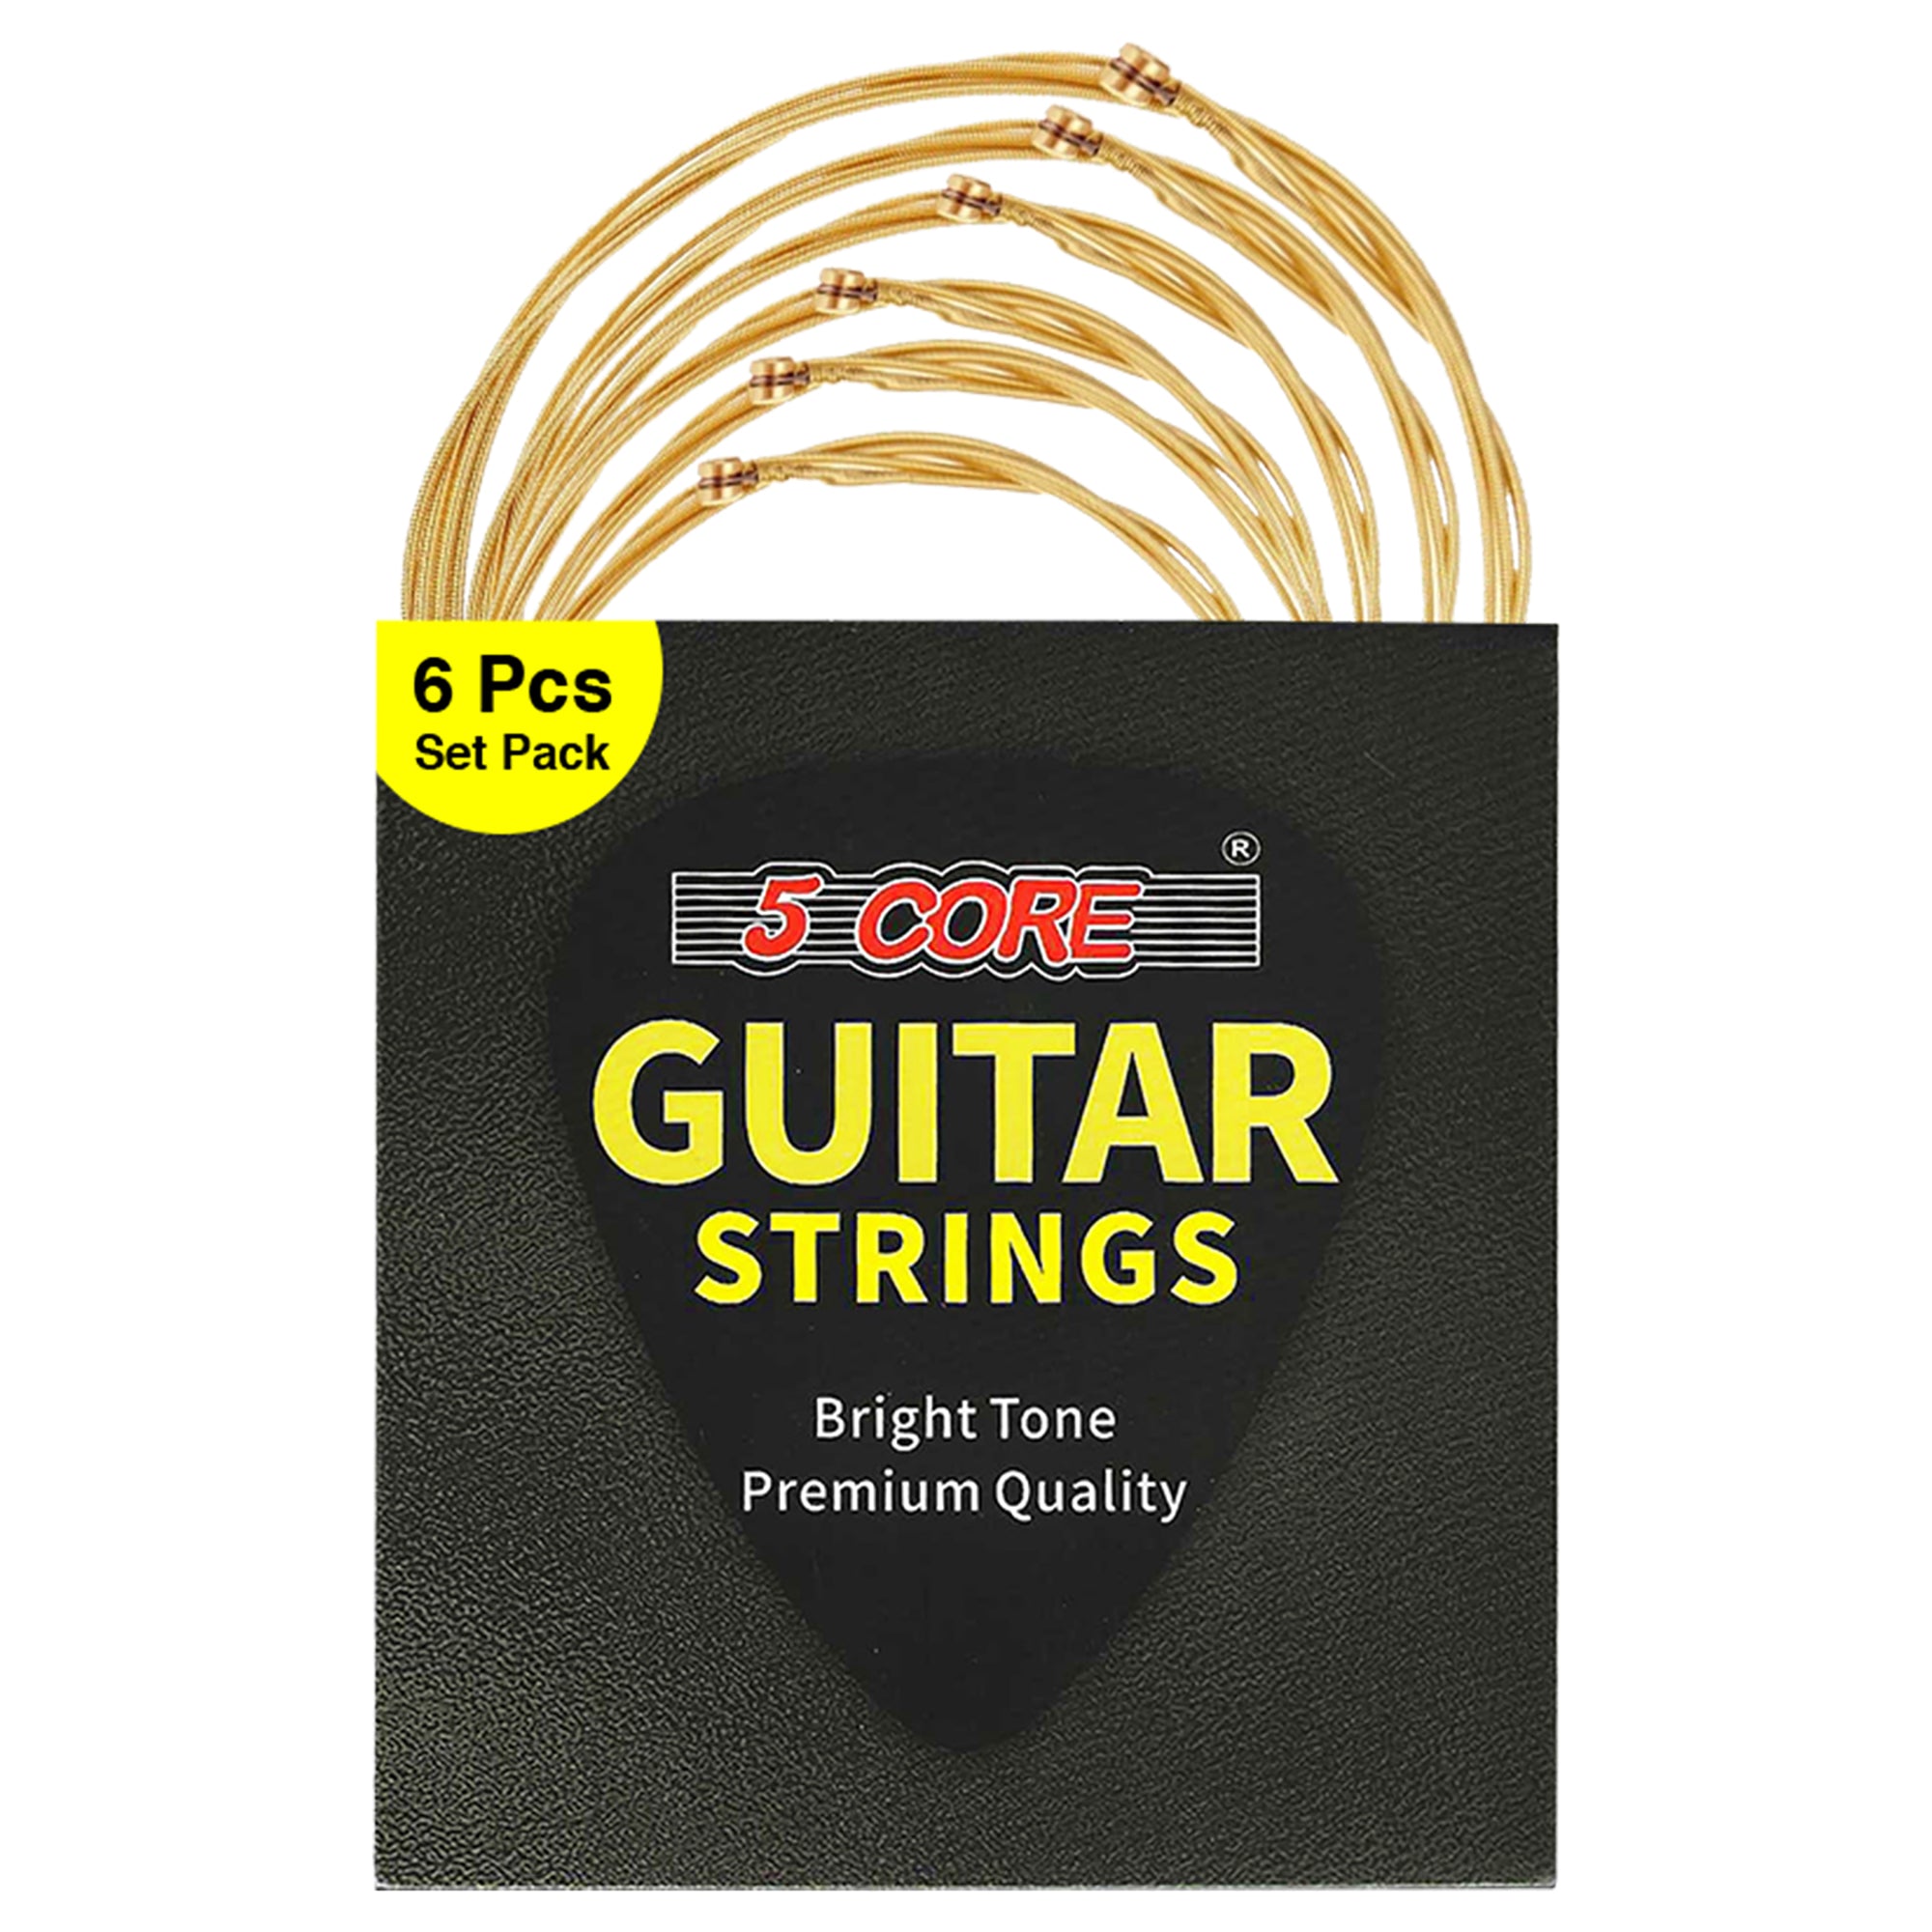 5 Core Guitar Strings 6Pcs in 1 Set Acoustic Guitar Strings with Hexangular Steel Core and Brass Wound Heavy Duty Gauge .010 to .047 - GS AC BRSS HD